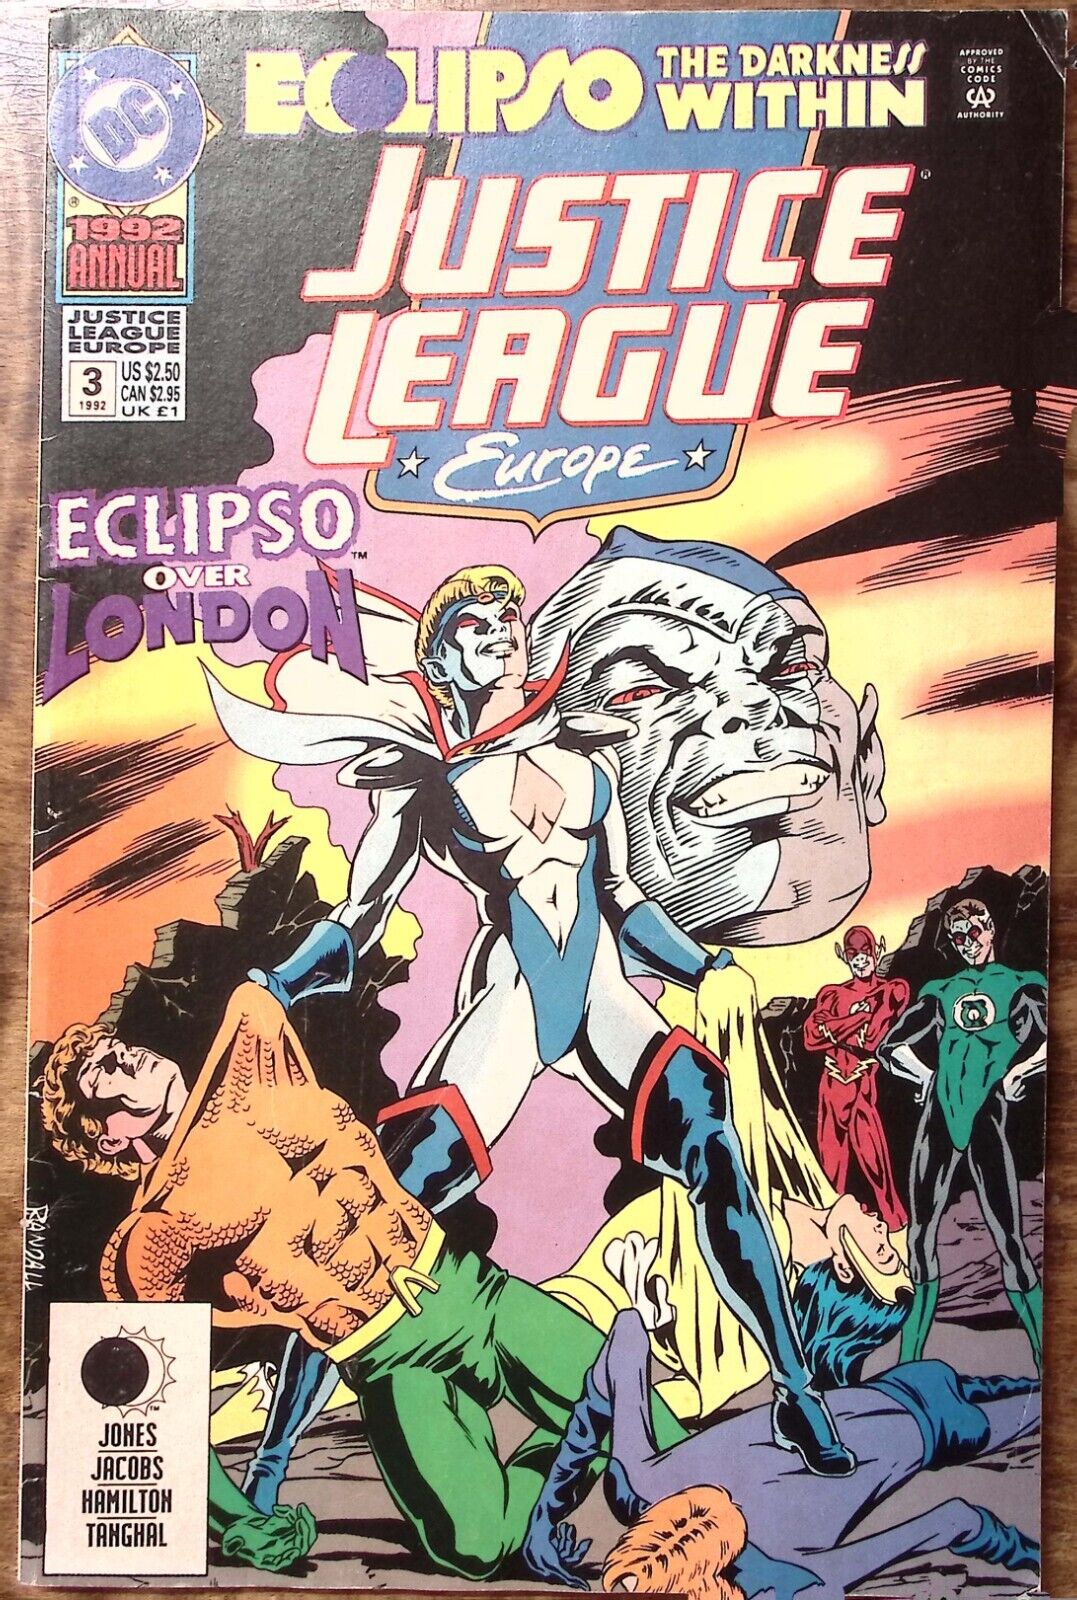 1992 JUSTICE LEAGUE EUROPE 1992 ANNUAL #3 ECLIPSO OVER LONDON DC COMICS Z3235